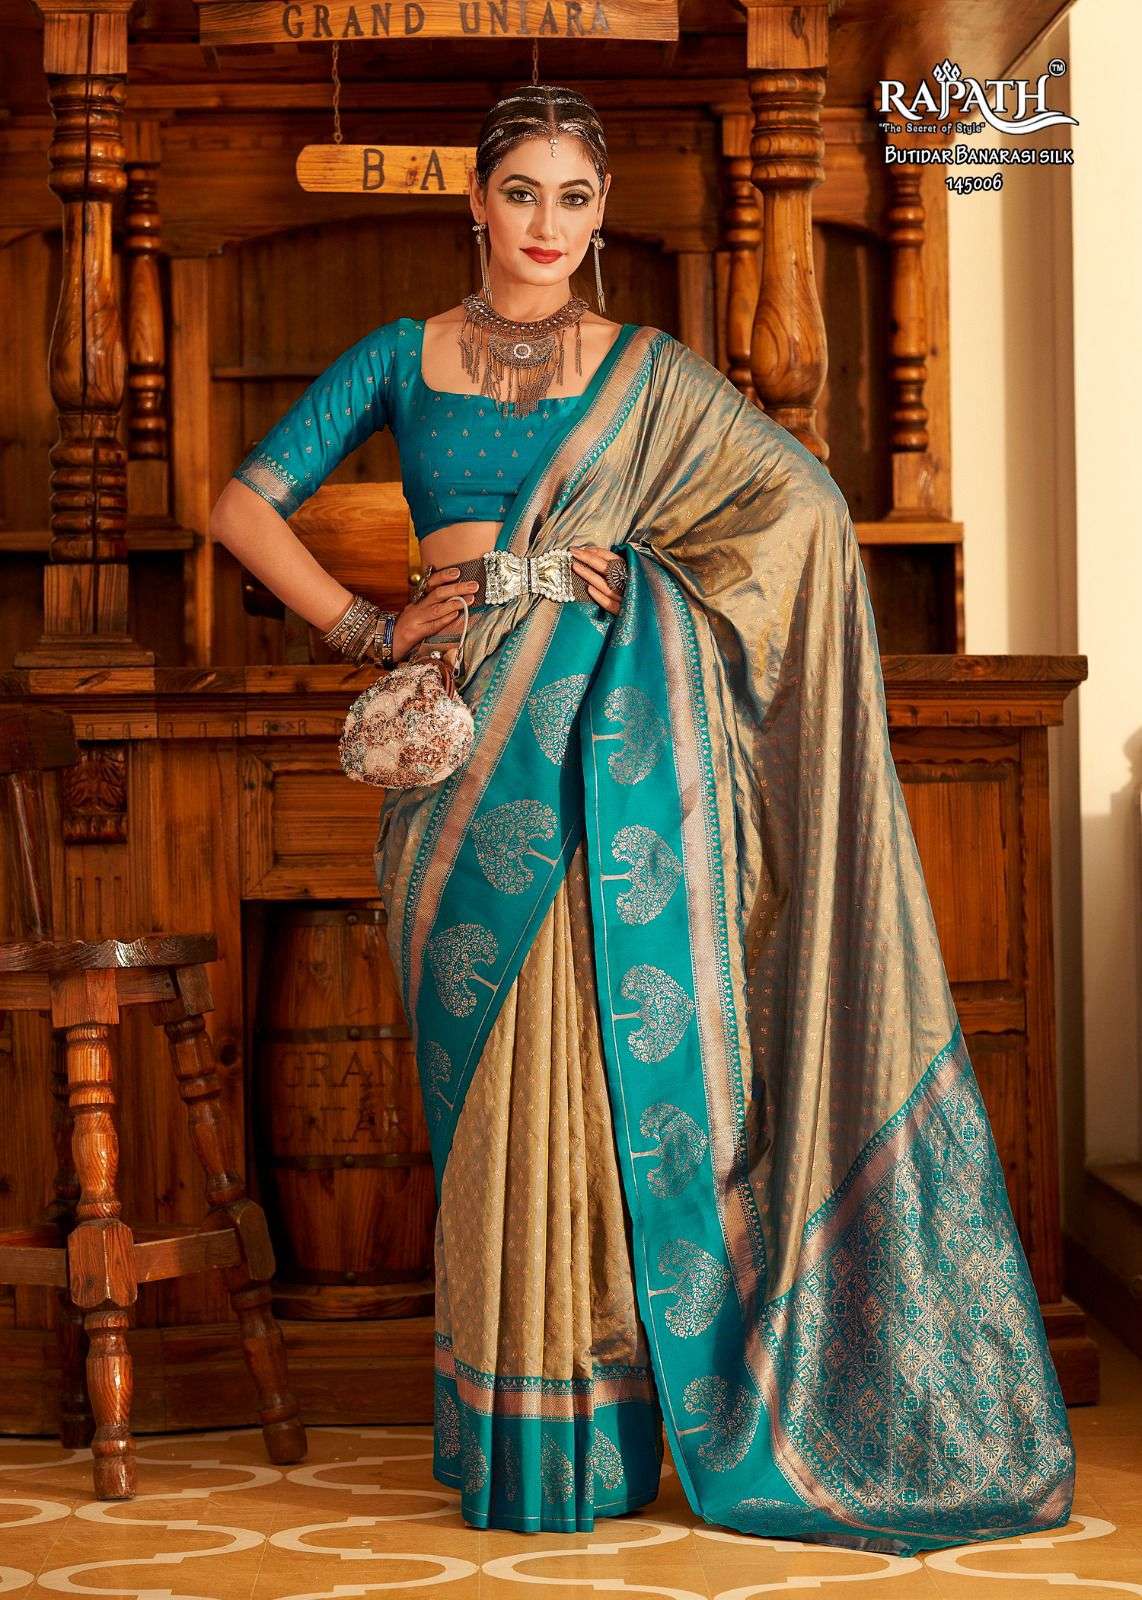 Vrishabha Silk By Rajpath 145001 To 145008 Series Indian Traditional Wear Collection Beautiful Stylish Fancy Colorful Party Wear & Occasional Wear Banarasi Silk Sarees At Wholesale Price